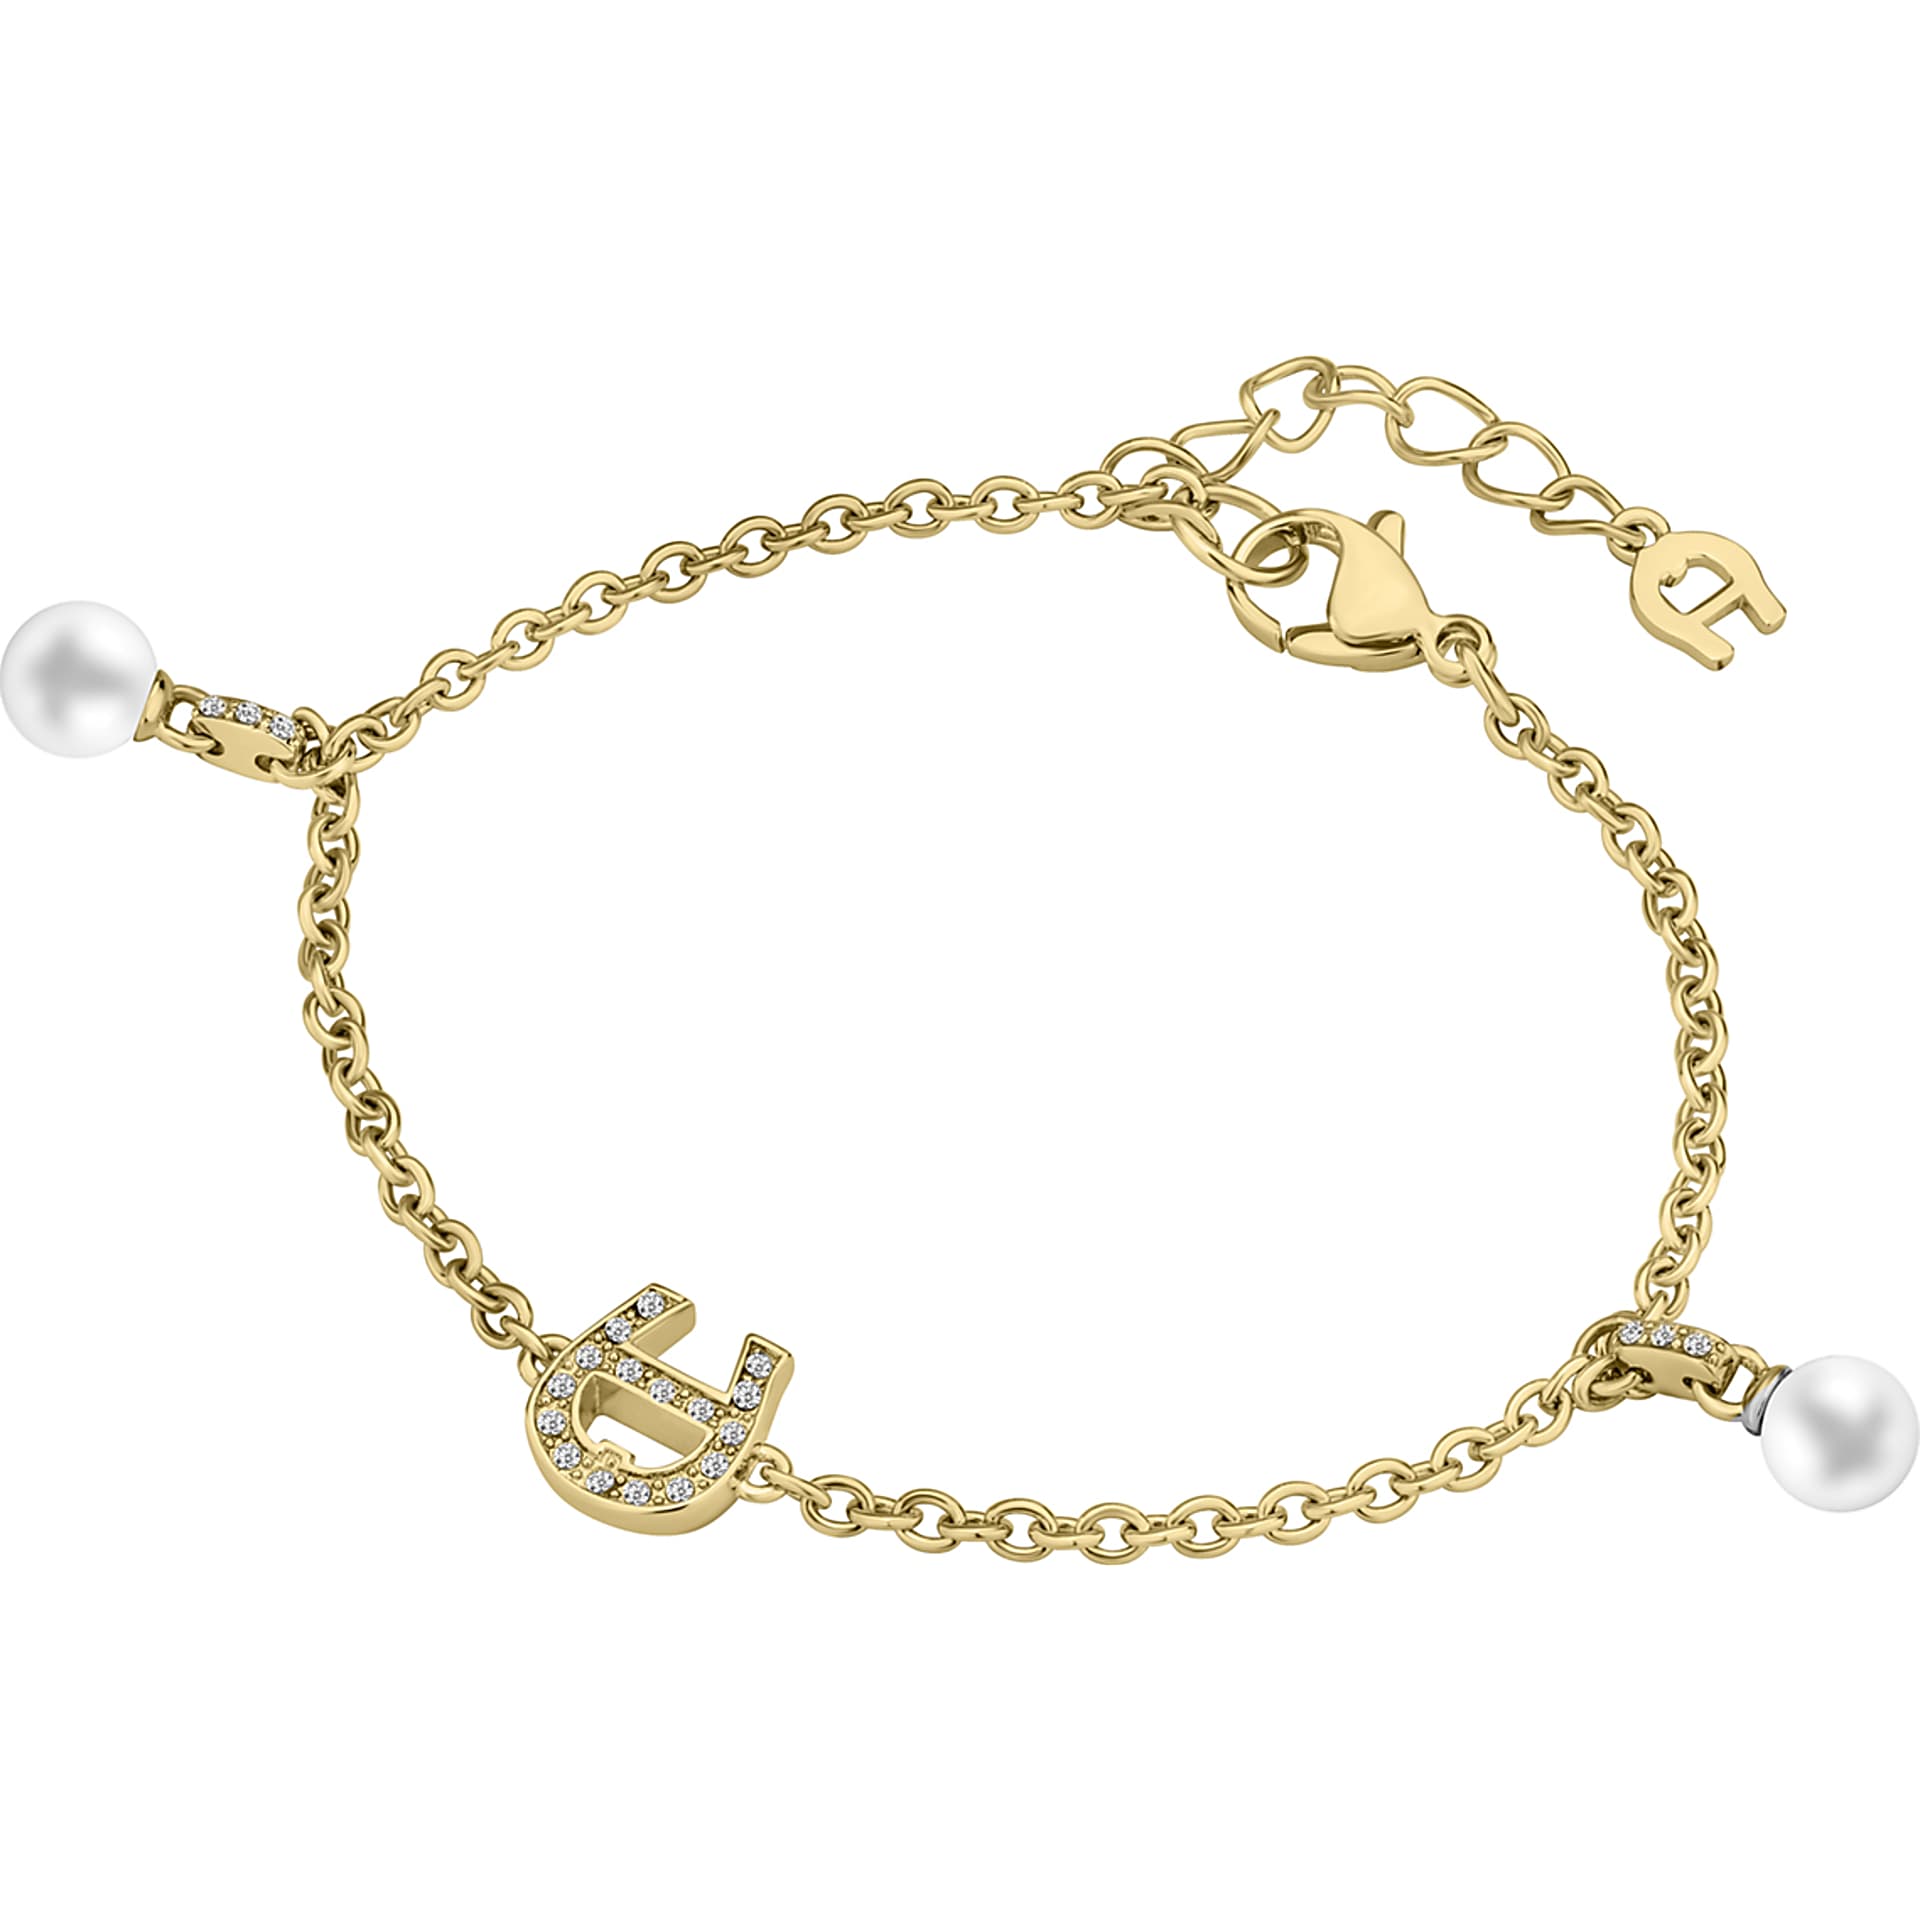 Bracelet with double logo gold coloured - Jewelry - Women - Aigner